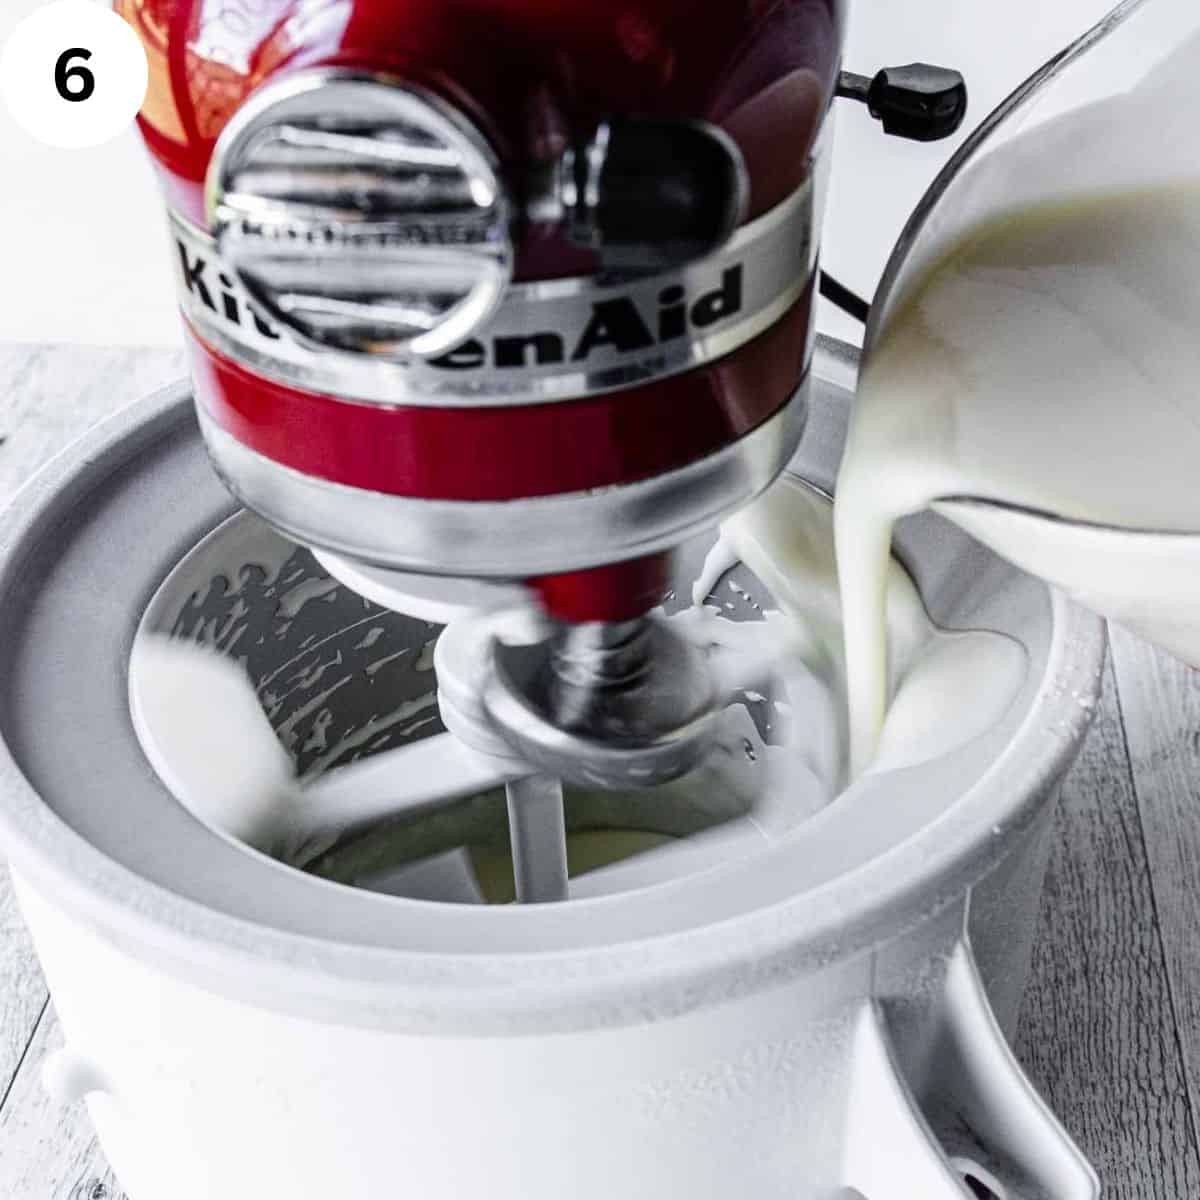 White liquid being poured into stand mixer ice cream maker.